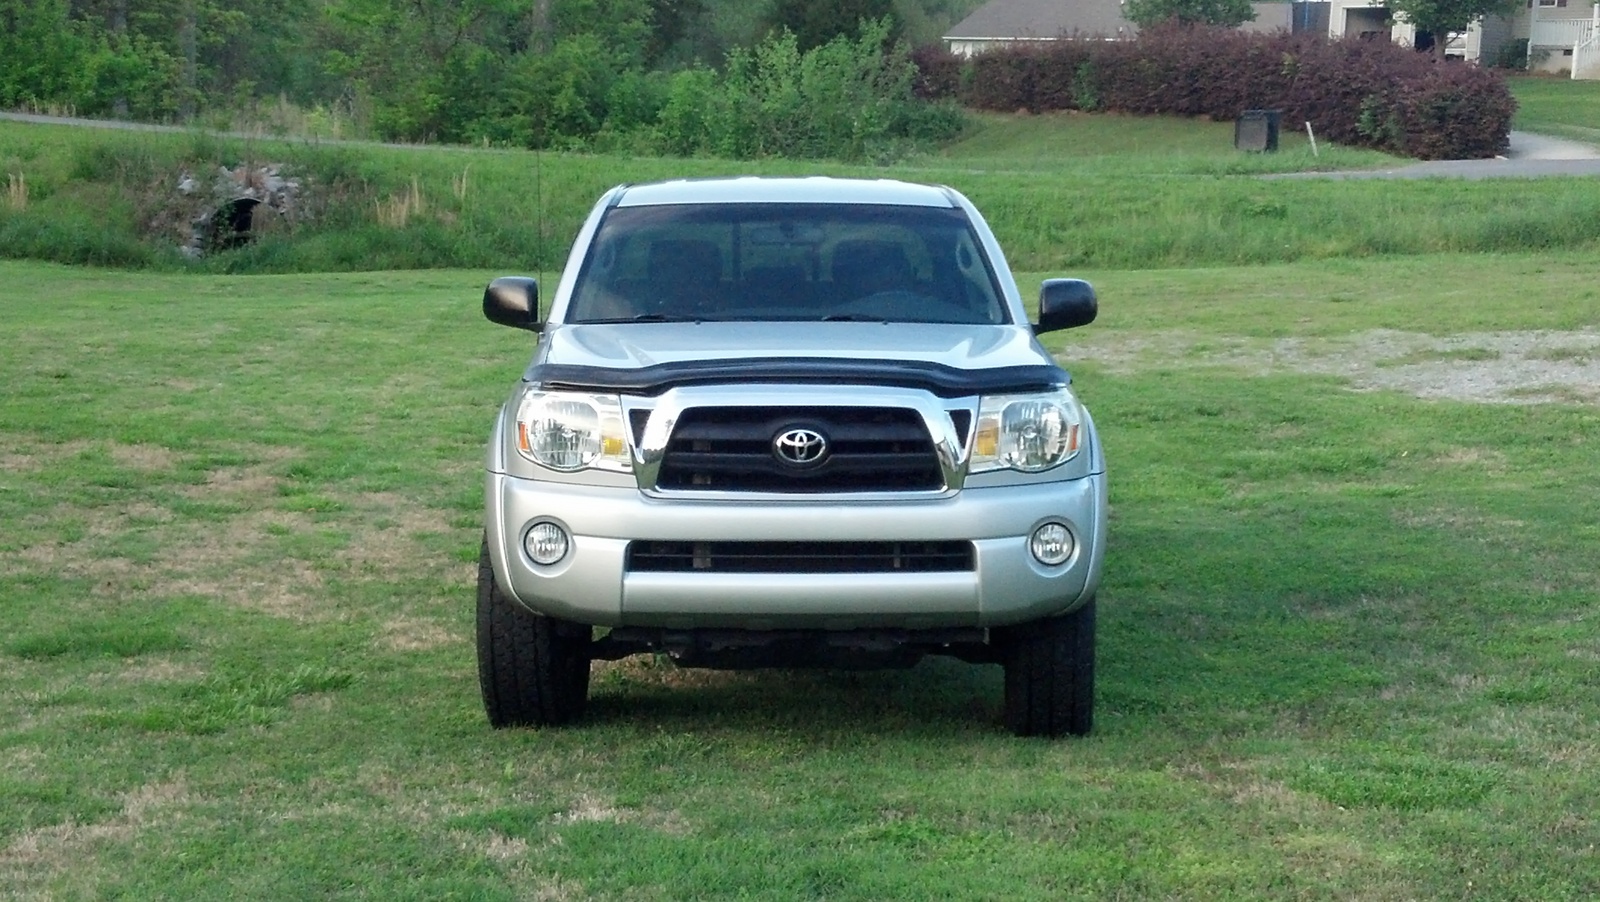 2007 toyota tacoma prerunner double cab review #2